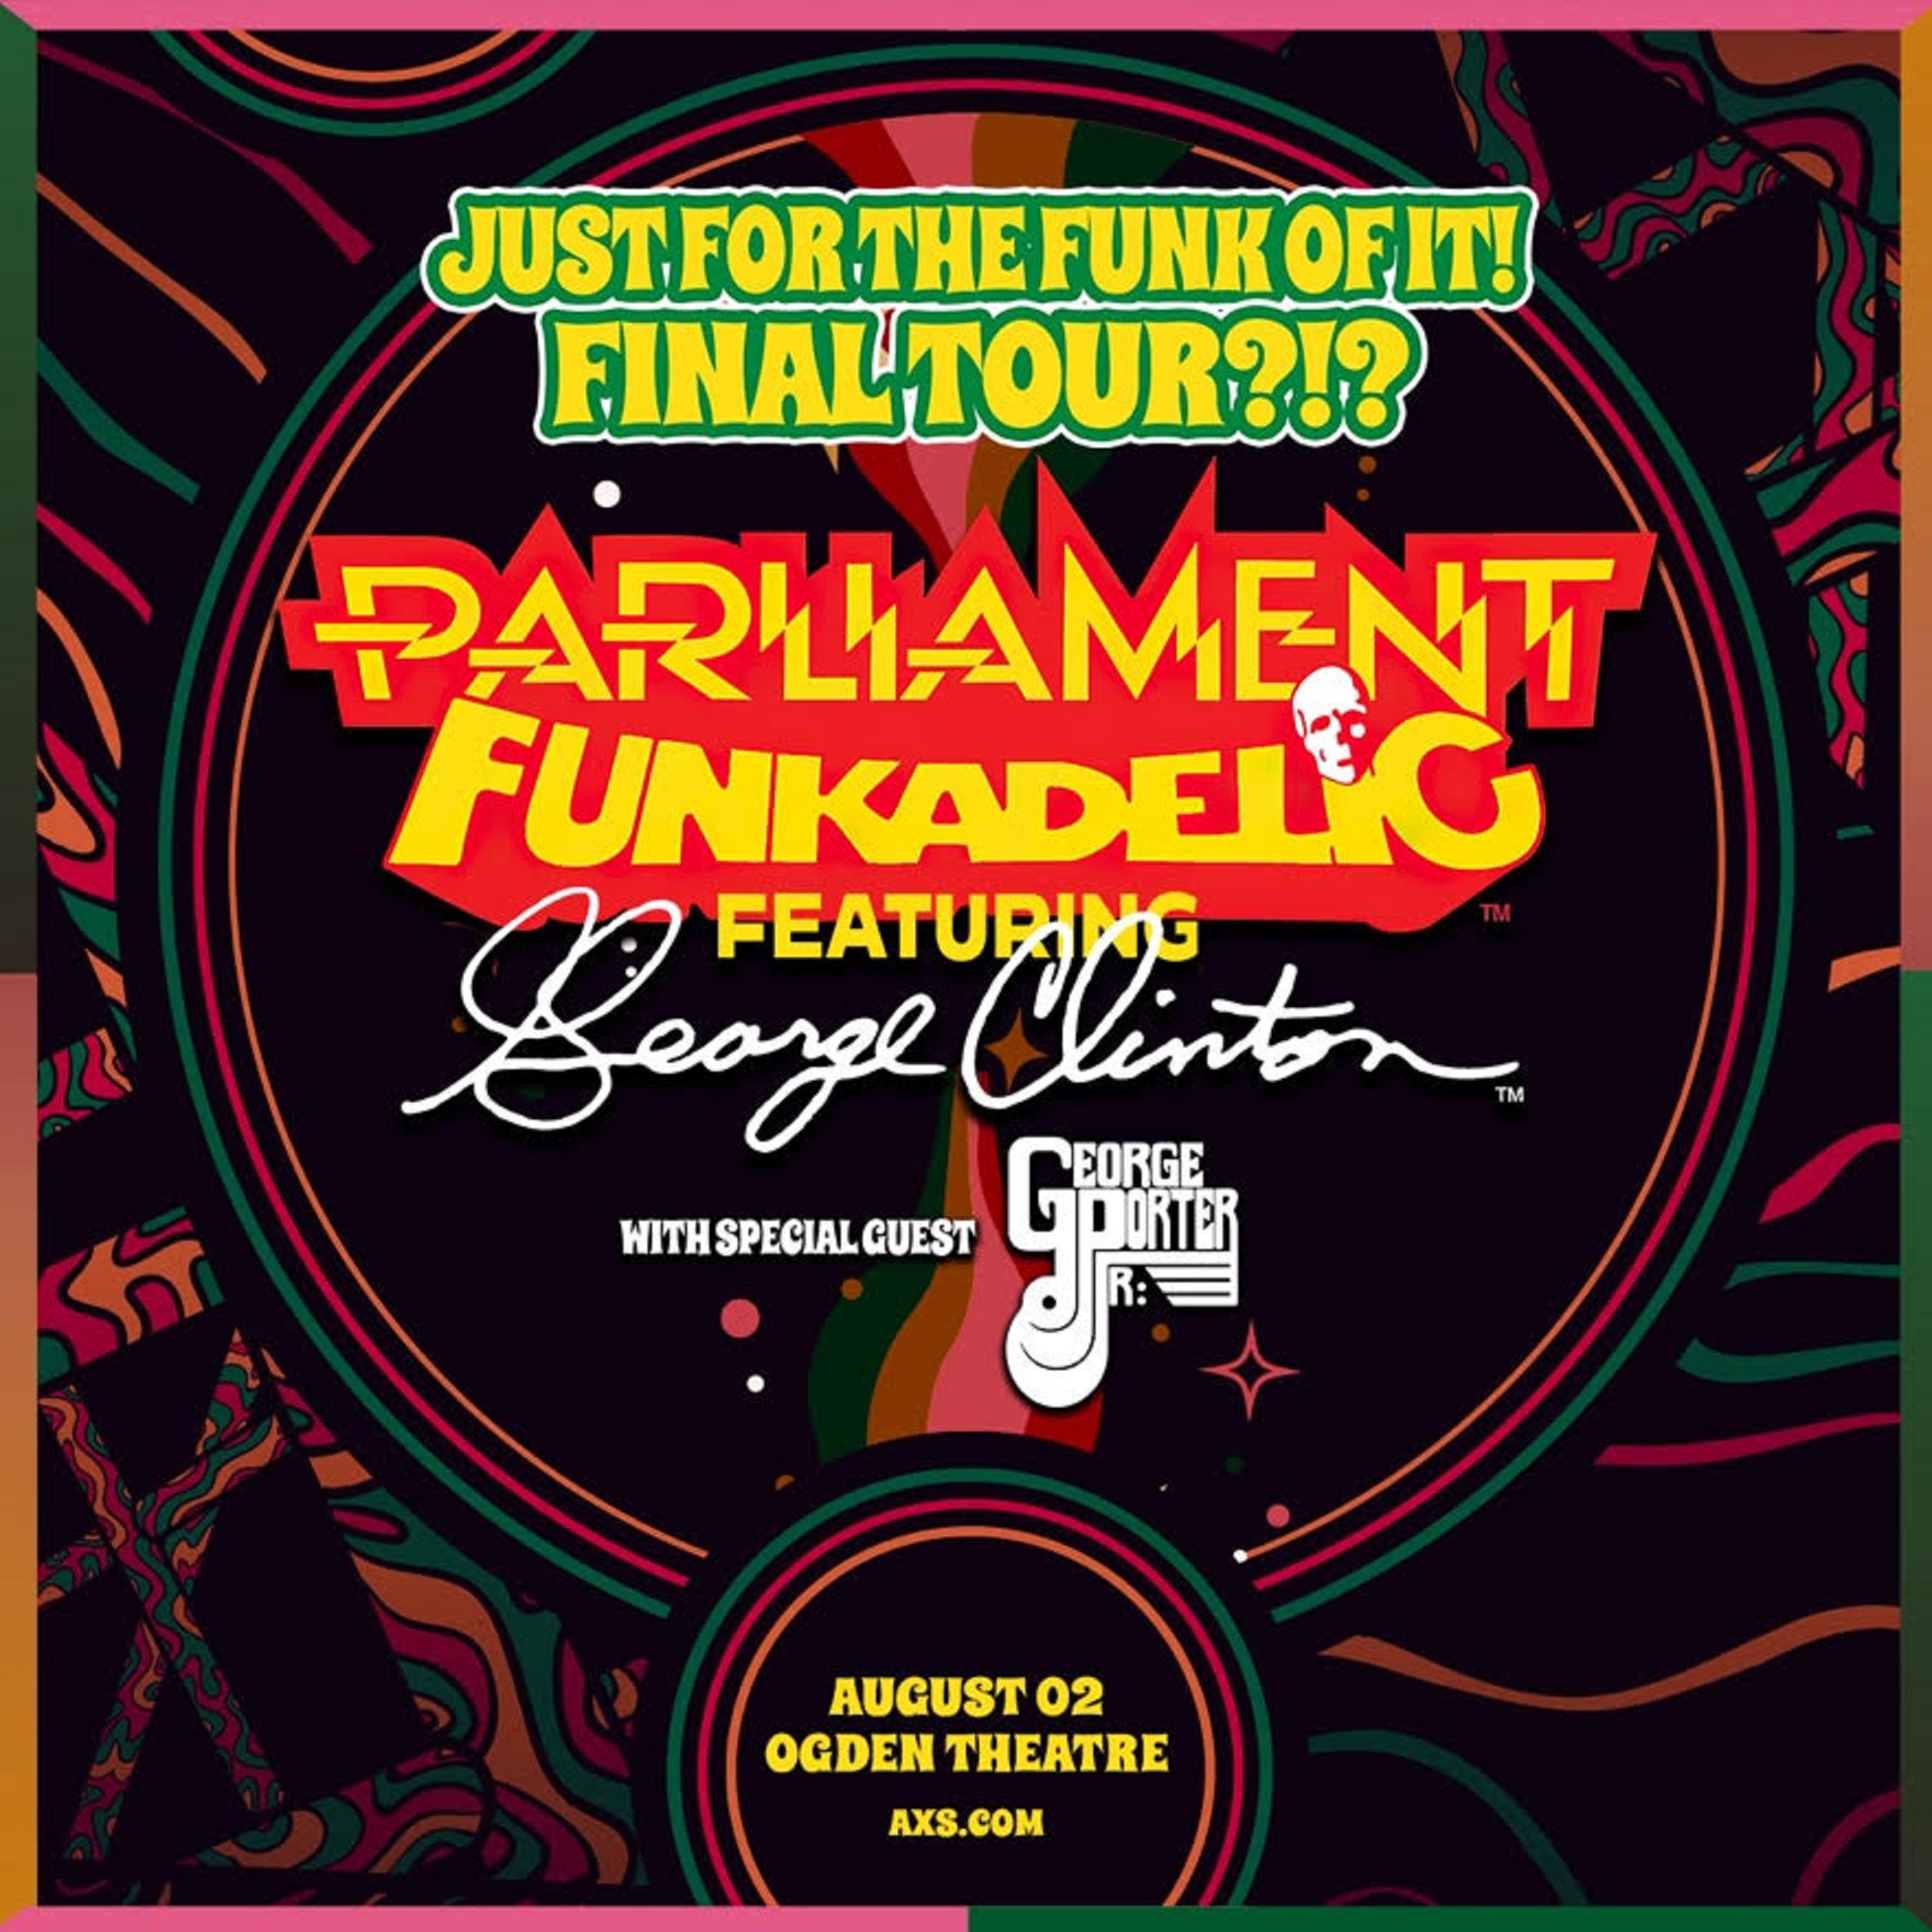 PARLIAMENT FUNKADELIC FEAT. GEORGE CLINTON with GEORGE PORTER JR. live at Ogden Theatre on Wednesday August 2, 2023